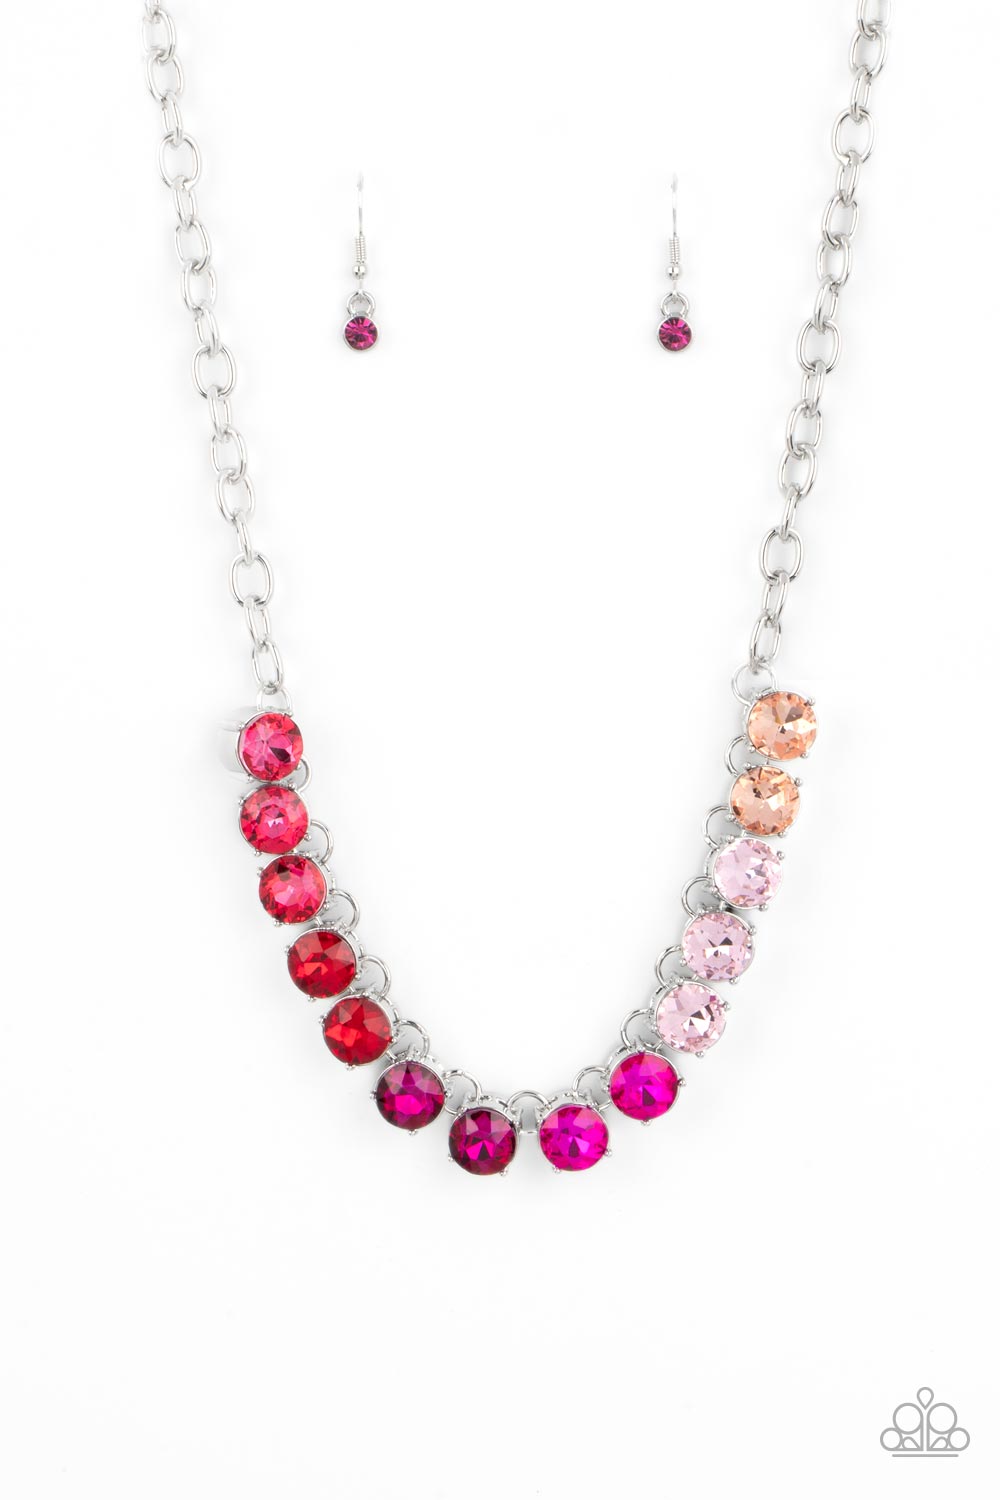 Paparazzi Accessories Rainbow RESPLENDENCE - Pink Rhinestone Necklaces set in bold silver fittings, a rainbow of oversized rhinestones in varying shades of pink sparkles below the collar for an out-of-this-world statement. Features an adjustable clasp closure.  Sold as one individual necklace. Includes one pair of matching earrings.